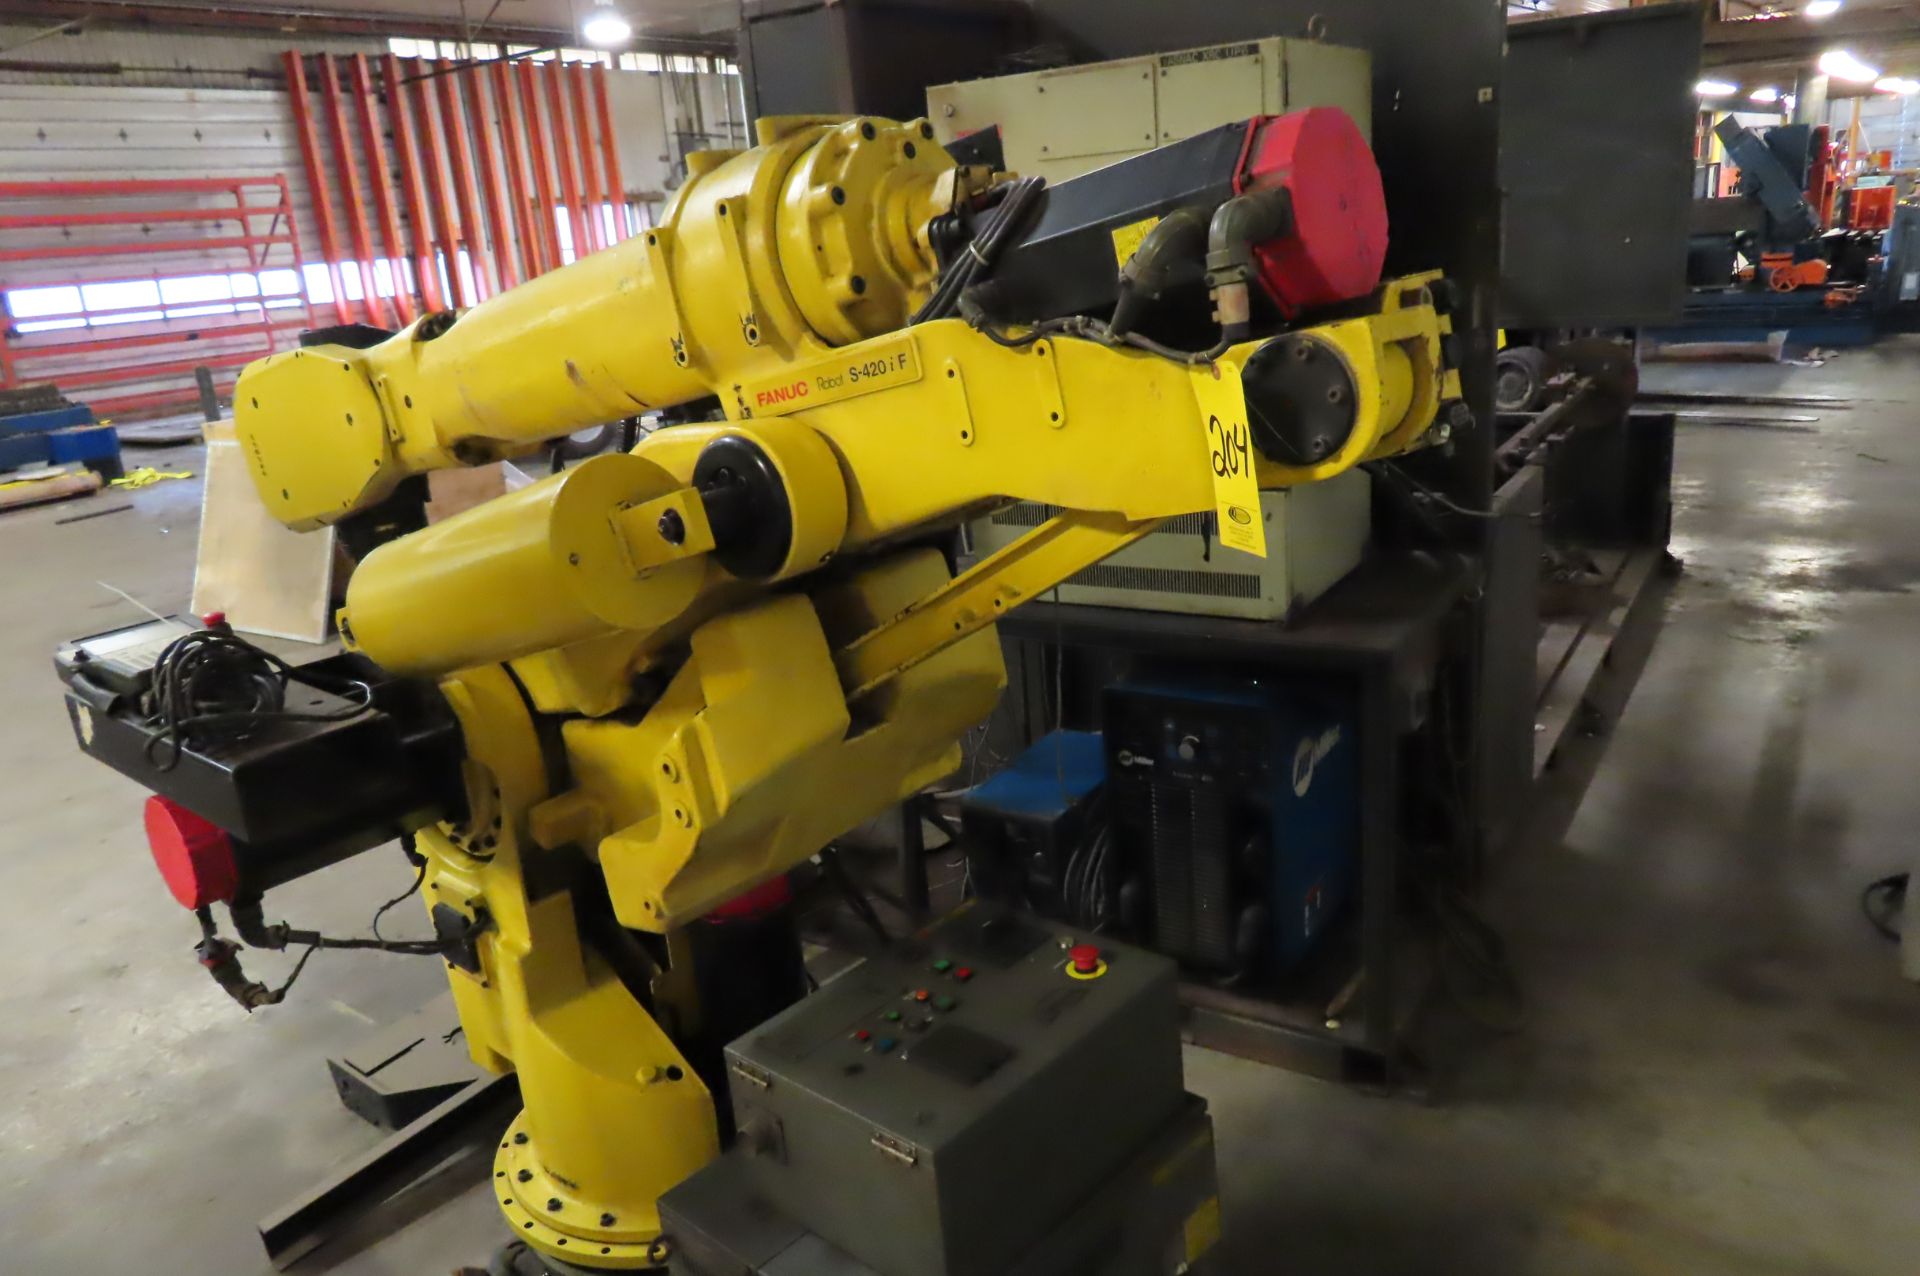 FANUC S-420IF WELDING ROBOT WITH SYSTEM R-J2 CONTROL AND PENDANT - Image 4 of 11